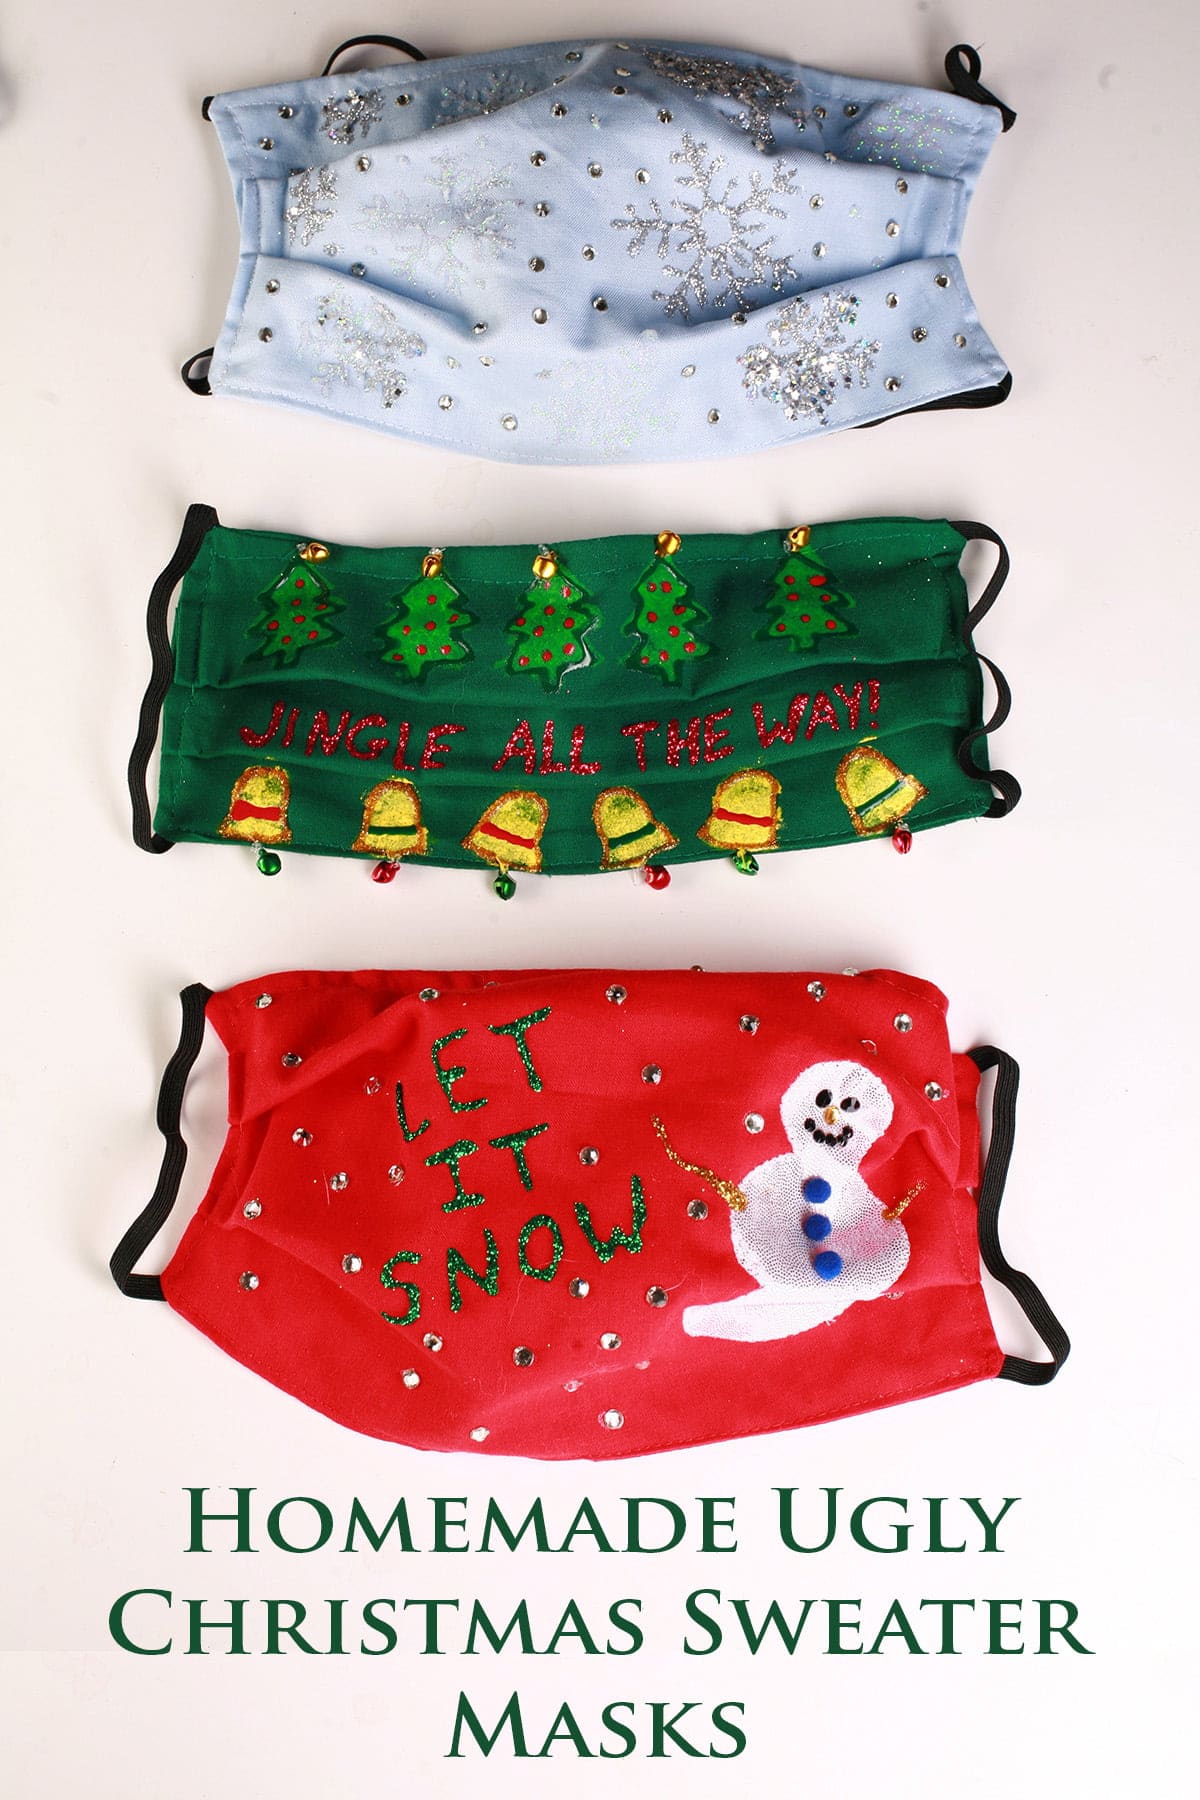 An array of 3 gaudily decorated "Ugly Christmas Sweater" style face masks, on a white background.